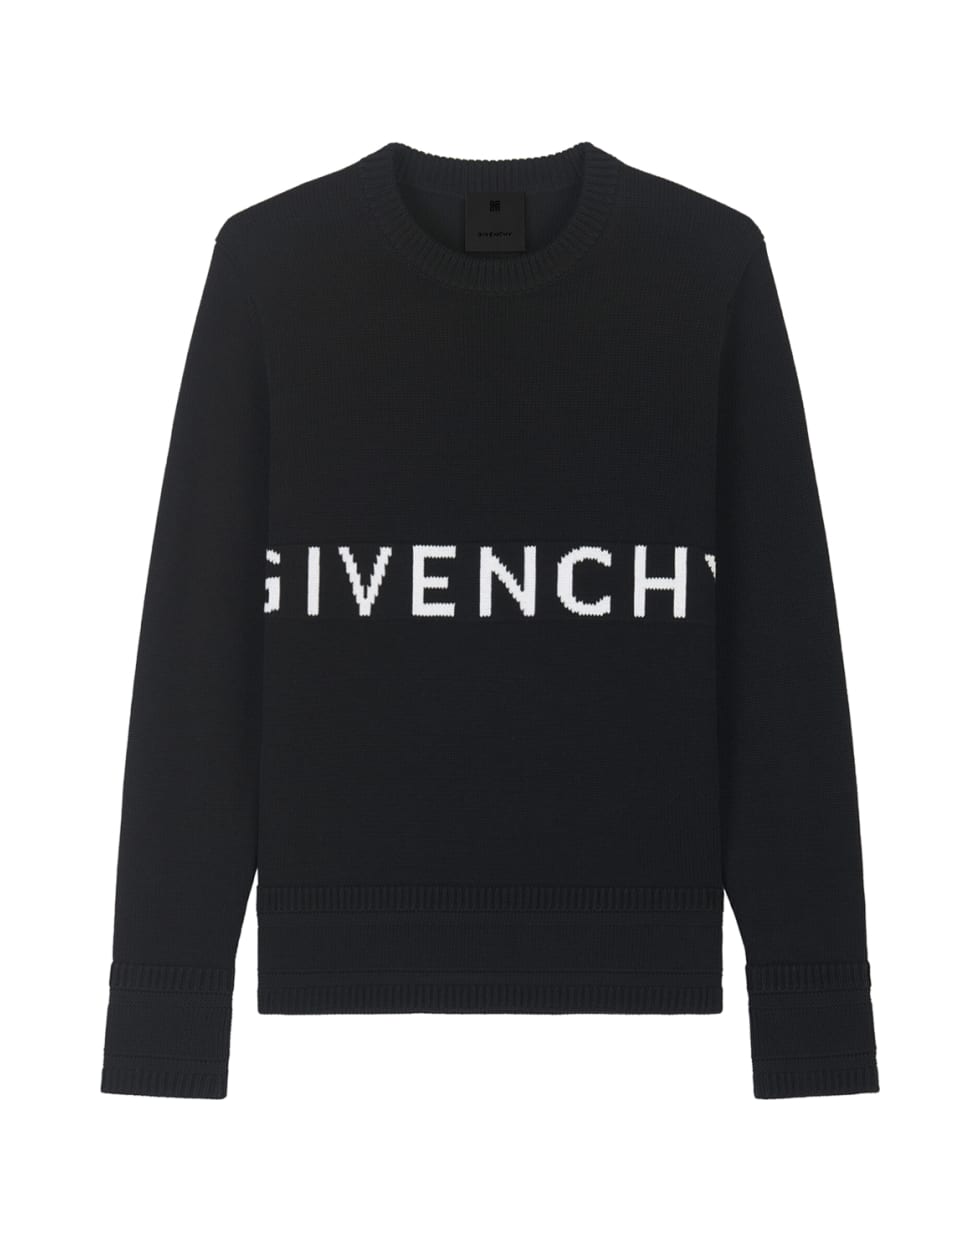 Givenchy 4g Crew Neck Sweater - Black